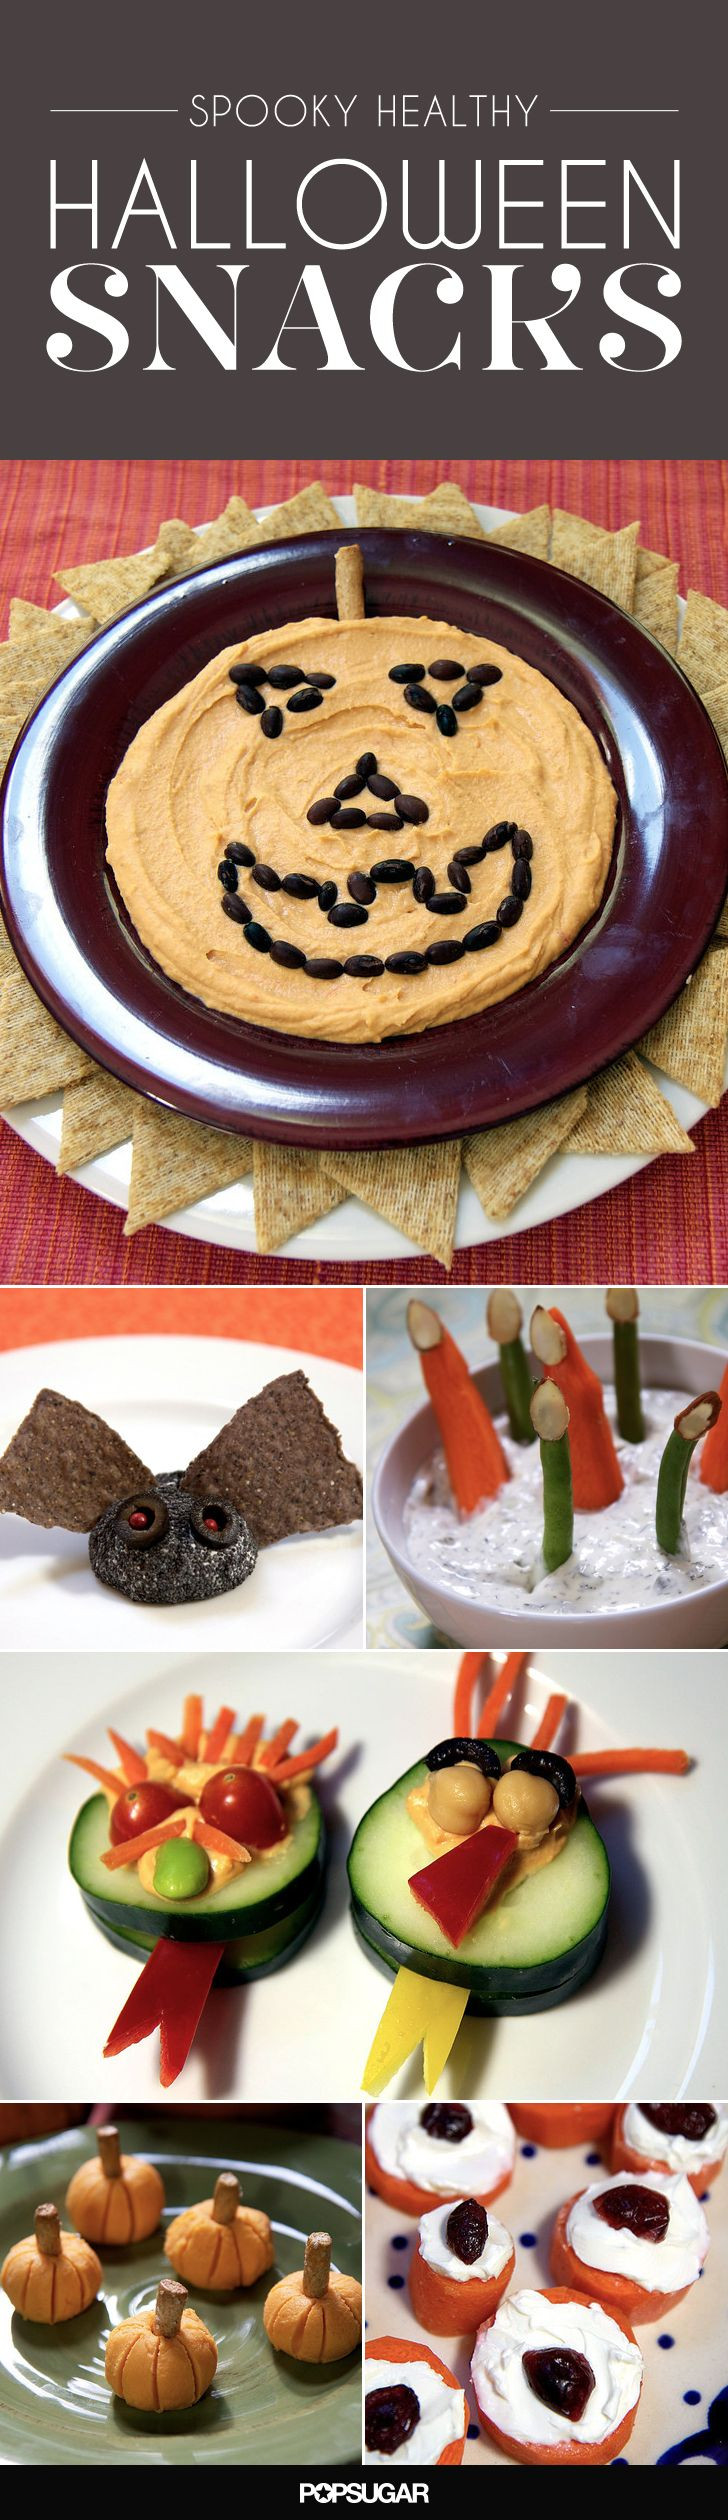 Healthy Halloween Appetizers
 Spooky Healthy Halloween Appetizers to Scare Away Hunger